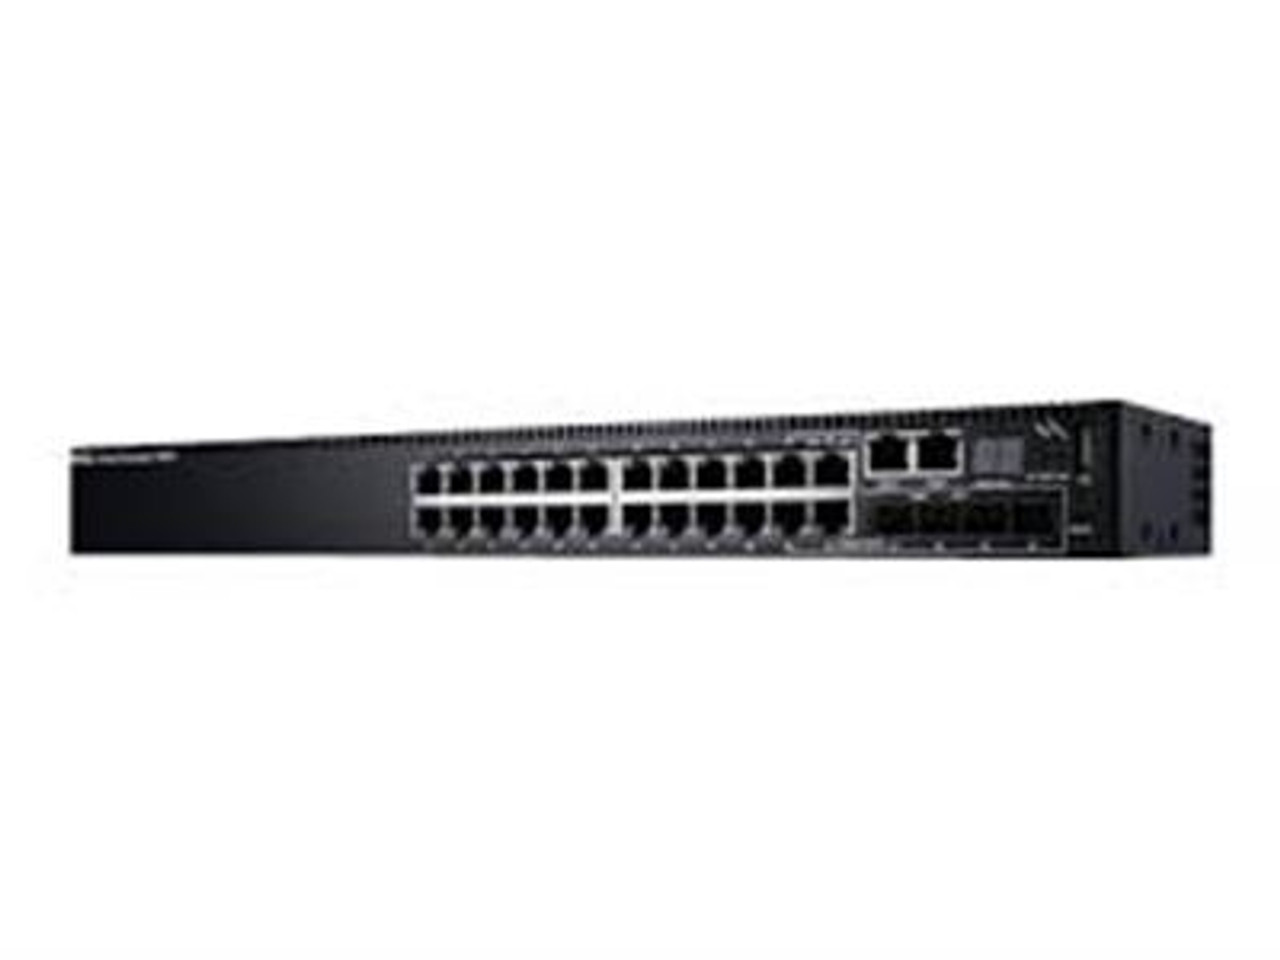 N8YN7 Dell Powerconnect 7048r 48-Ports 10GBase-T Gigabit Layer 3 Network Switch with 4x SFP (Refurbished)